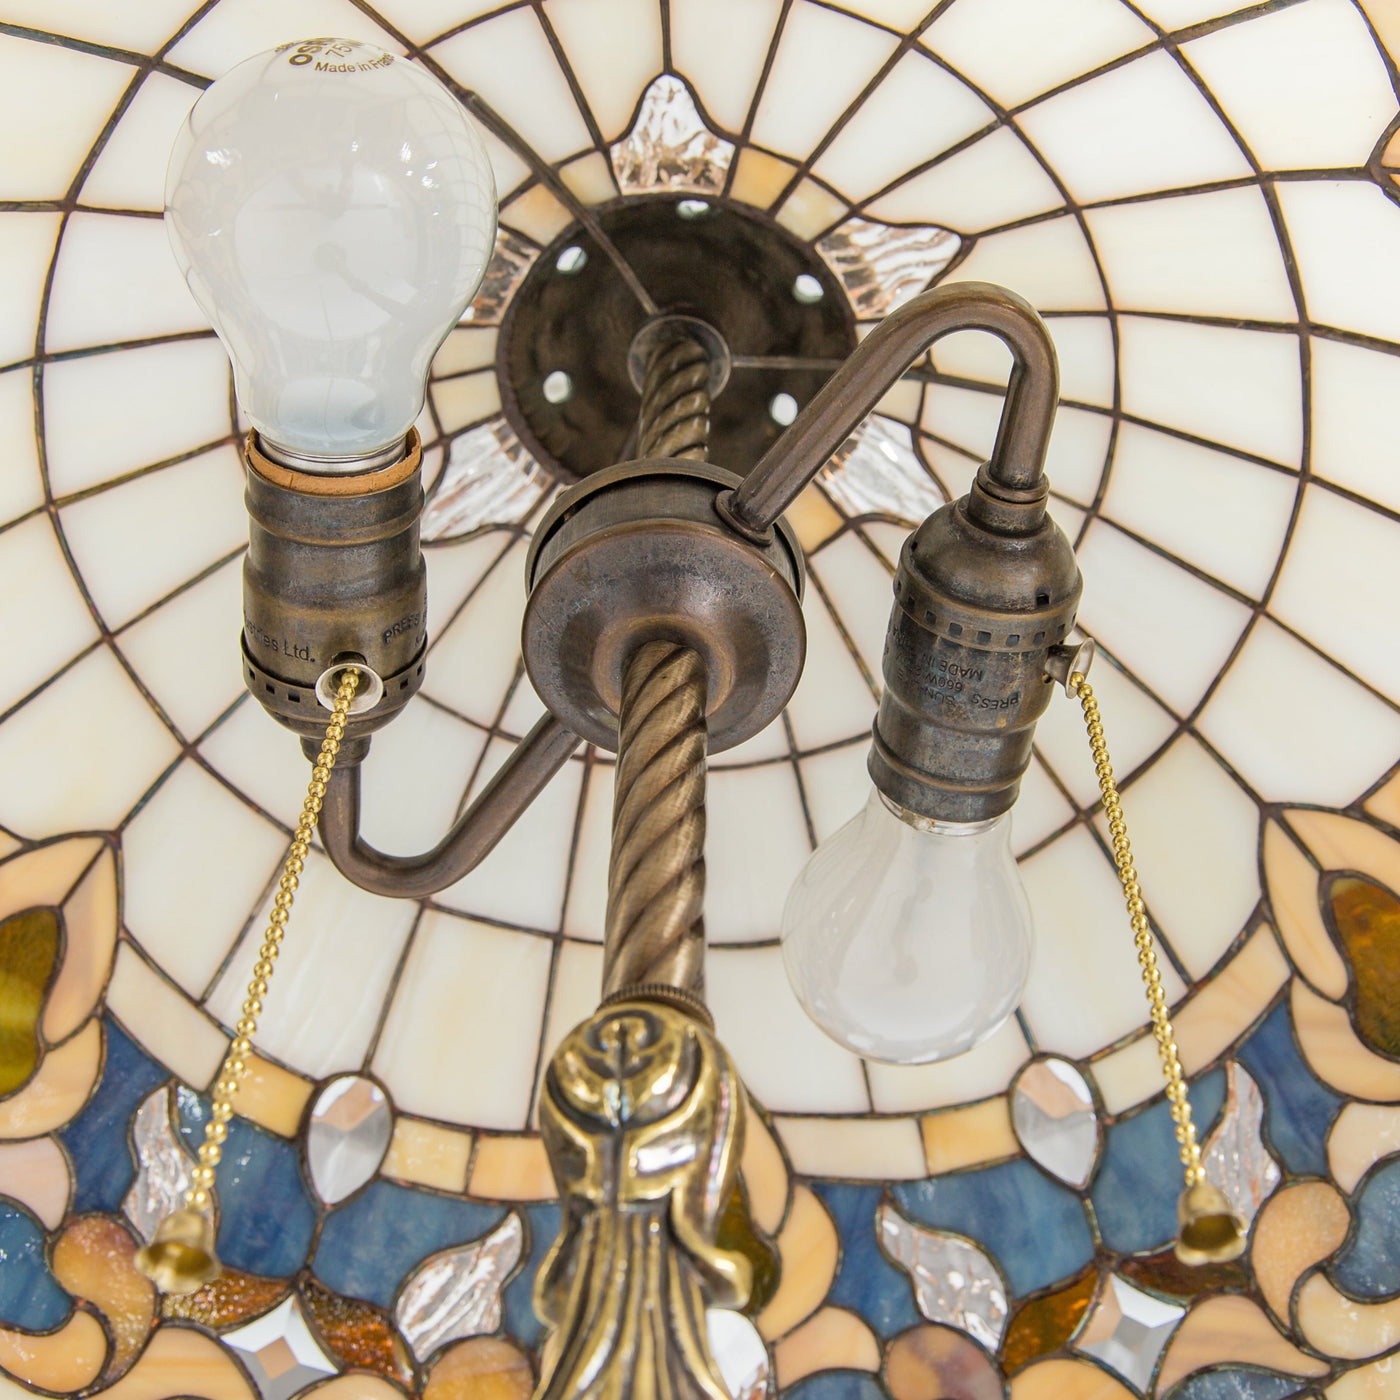 The inner view of stained glass Tiffany lamp of beige shades